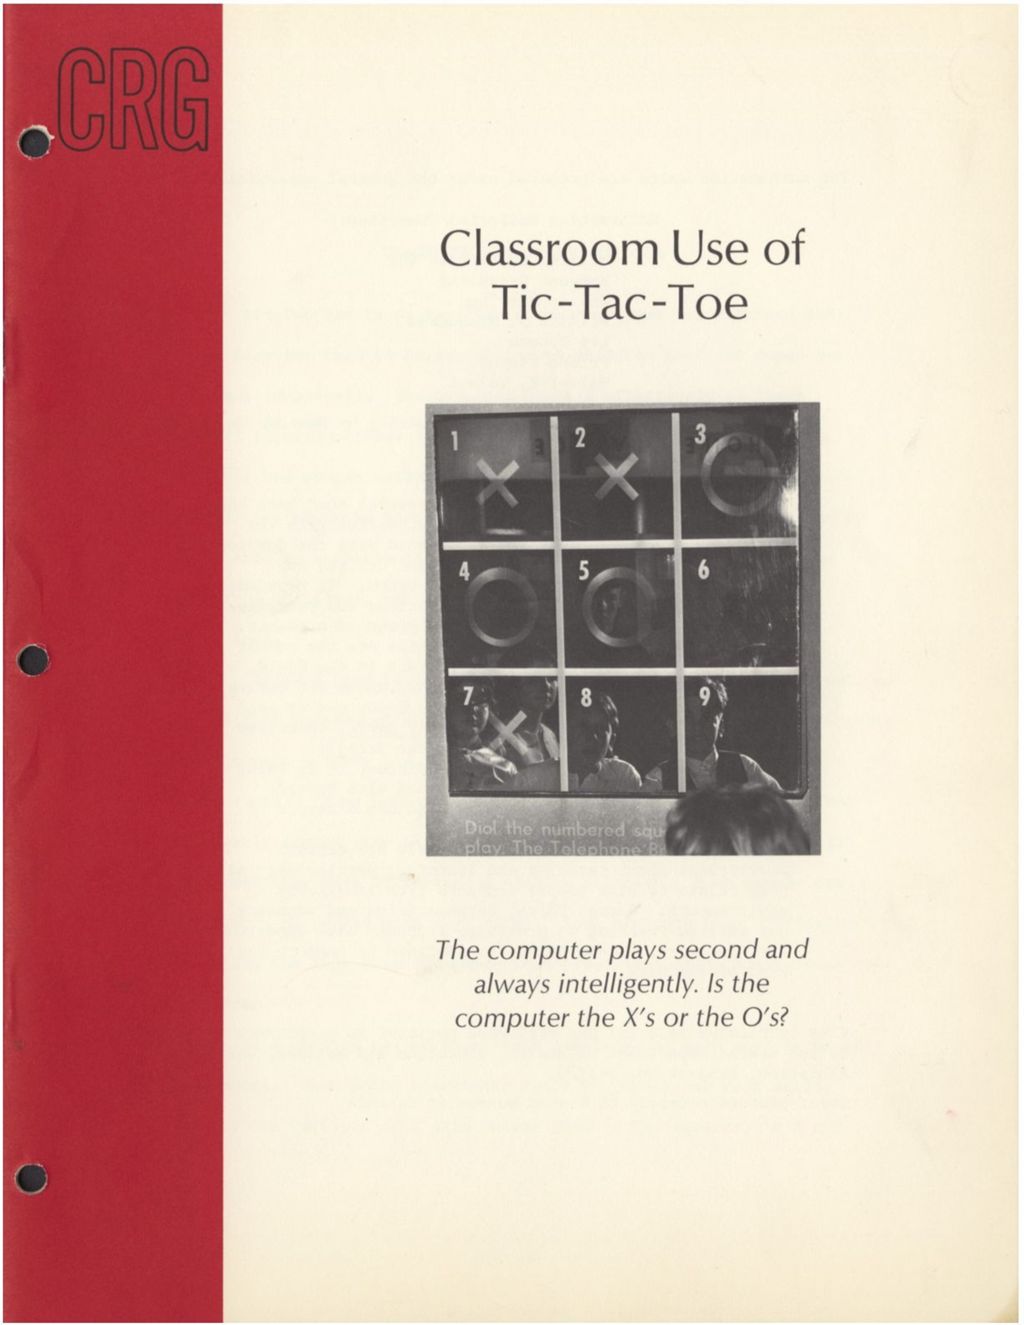 Miniature of Classroom Use of Tic-Tac-Toe: The computer plays second and always intelligently. Is the computer the Xs or the Os?